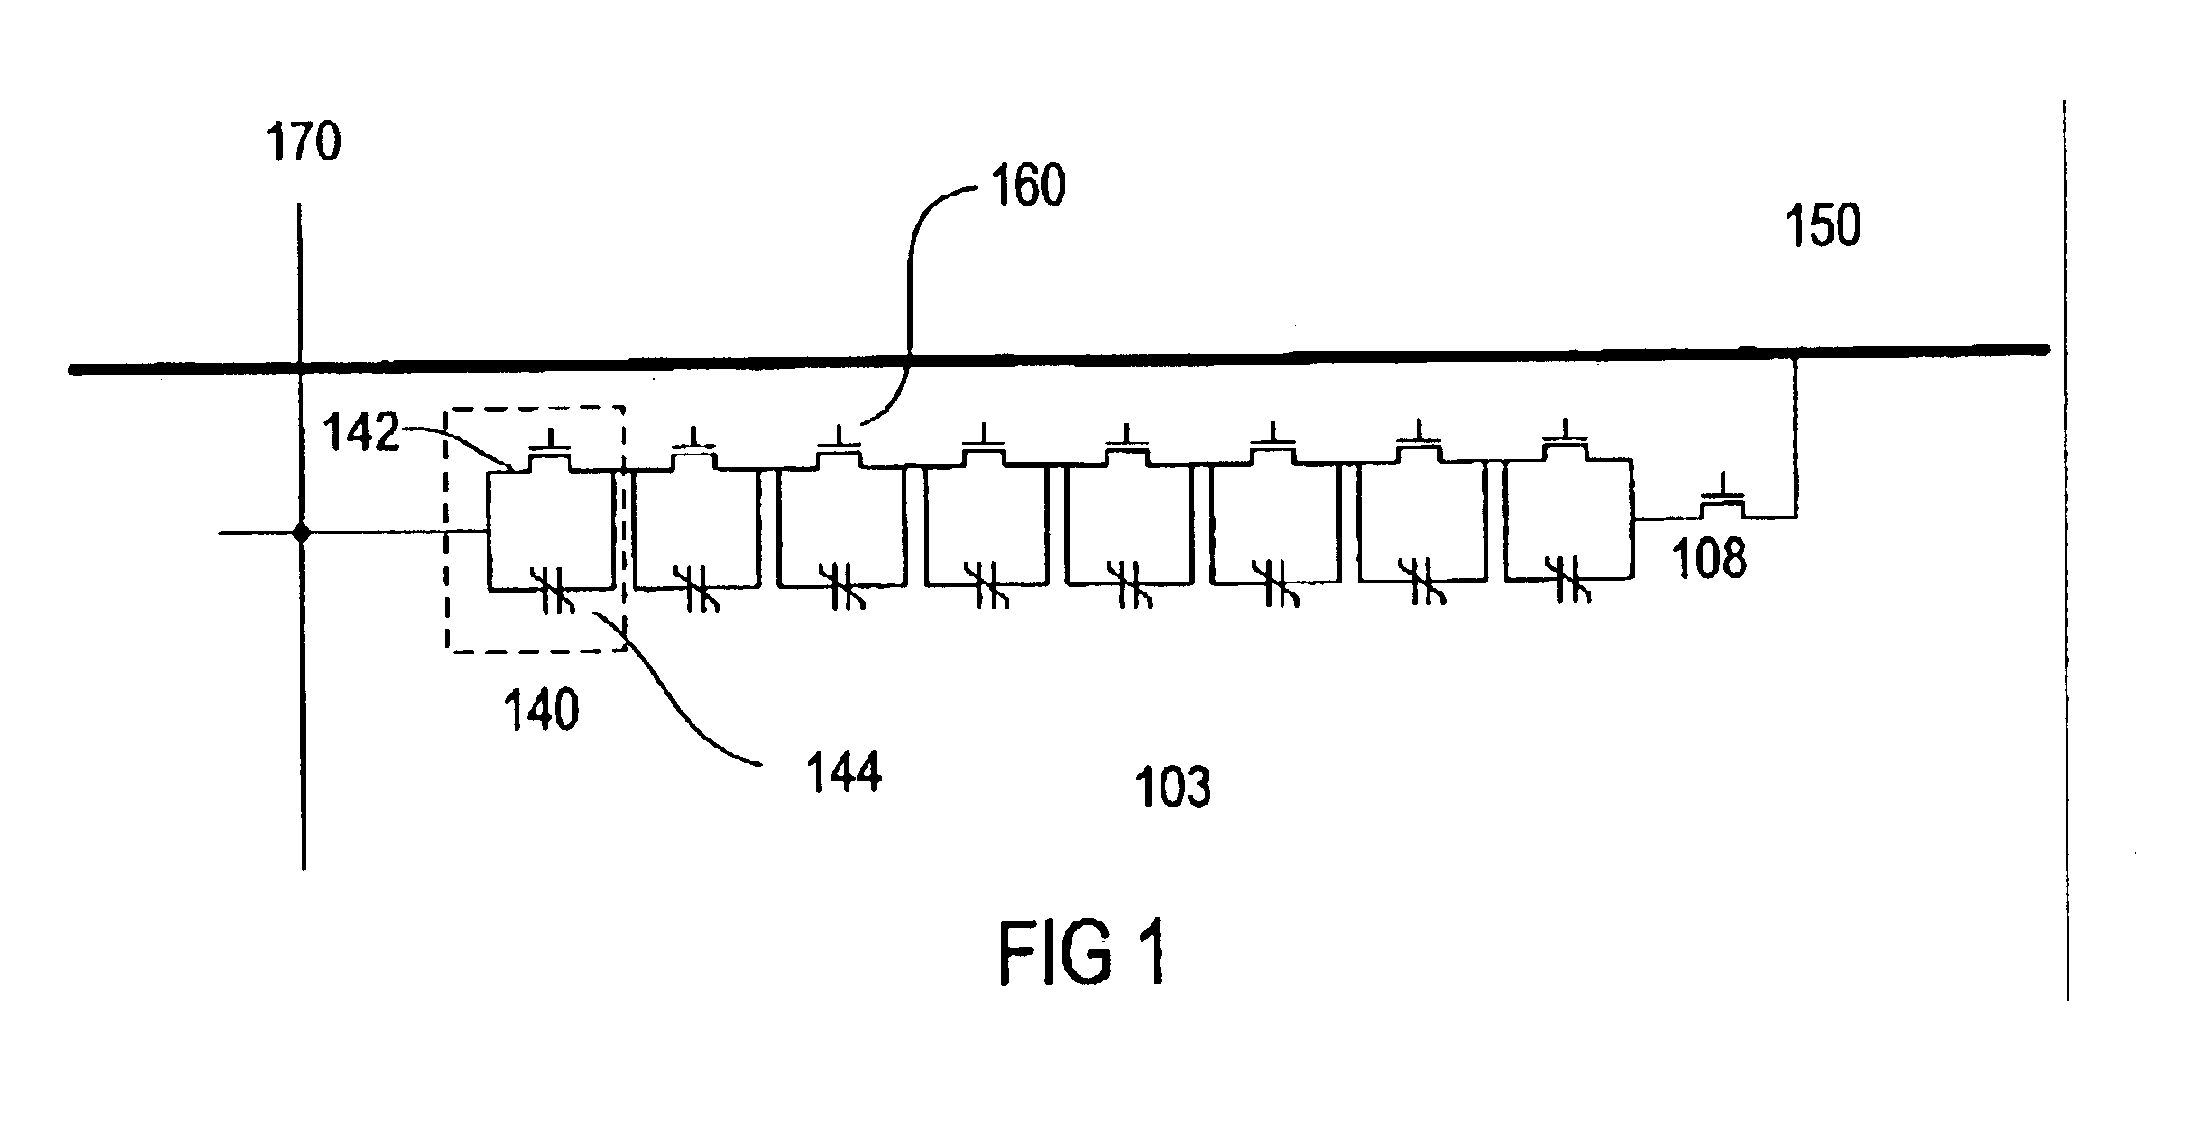 Ferroelectric memory integrated circuit with improved reliability